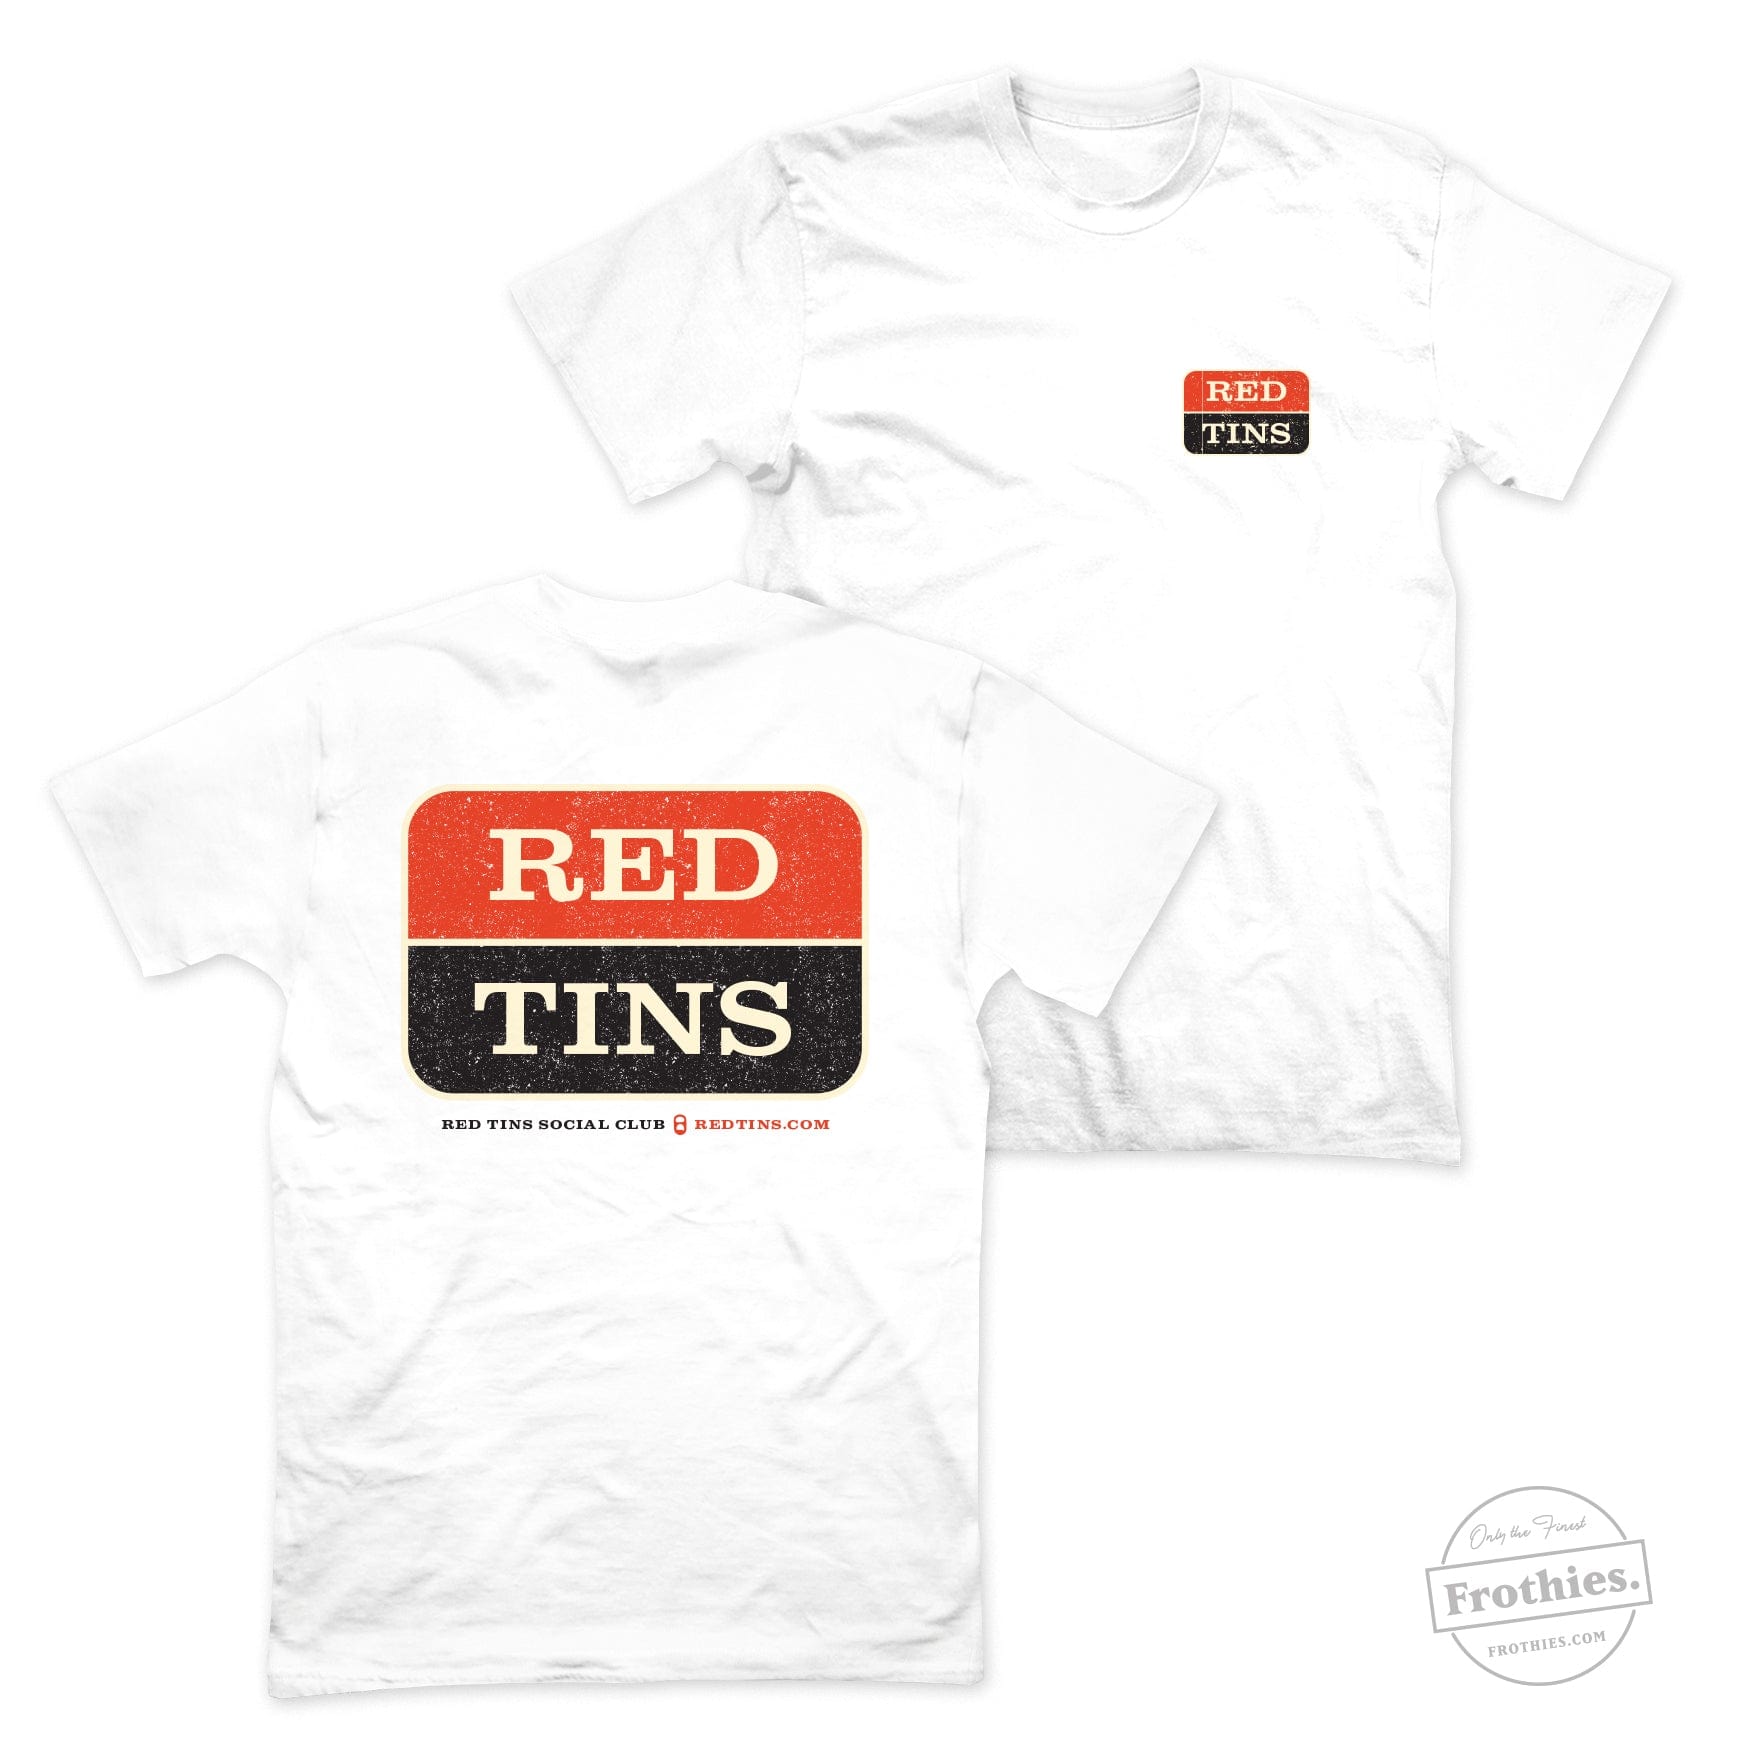 The Red Tins Vintage Tee T-Shirt Red Tins